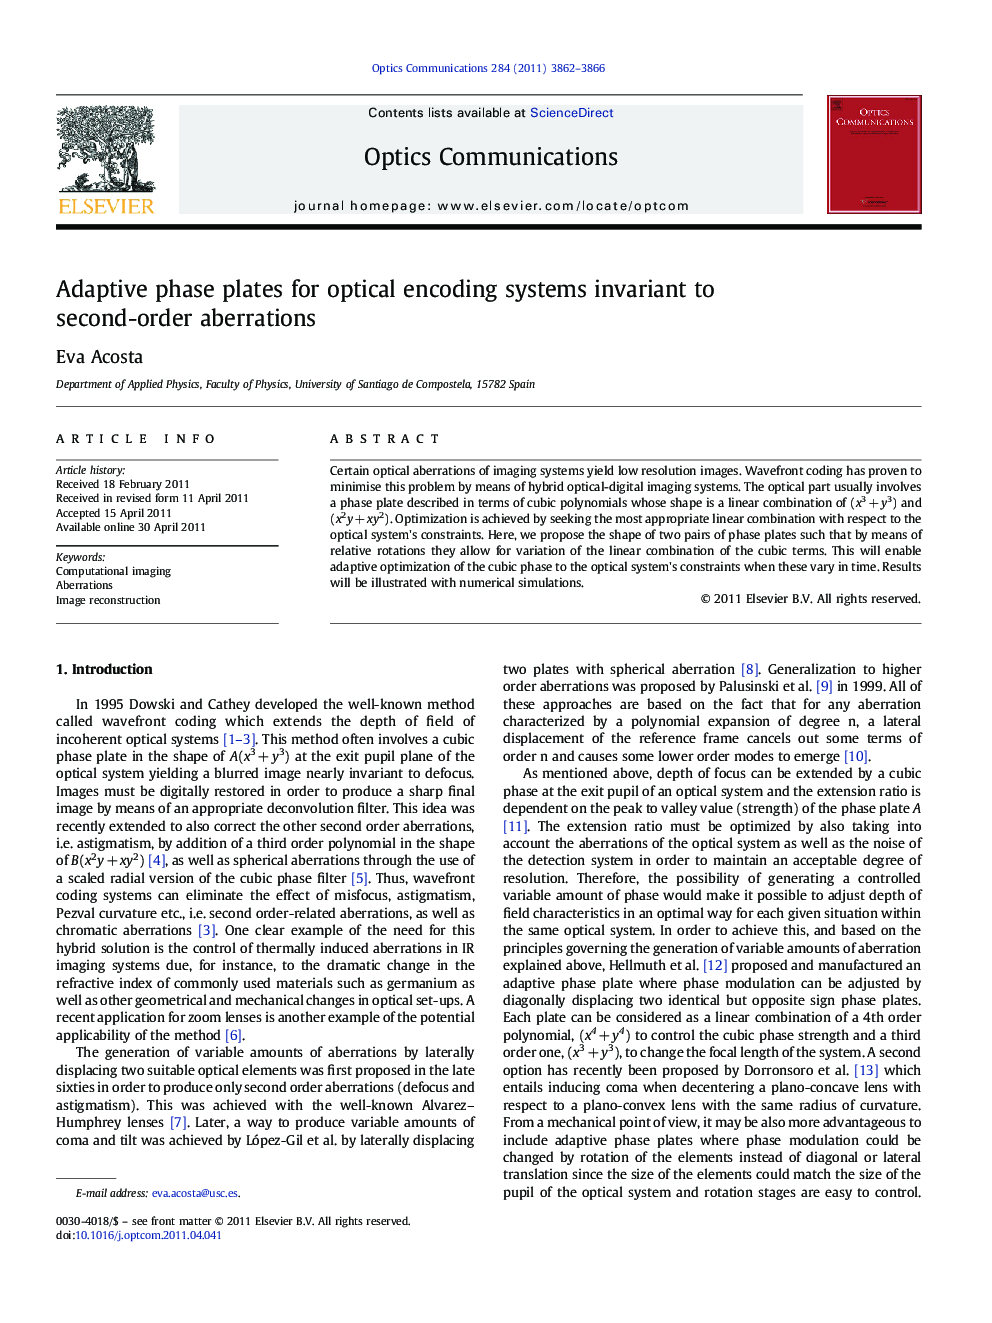 Adaptive phase plates for optical encoding systems invariant to second-order aberrations